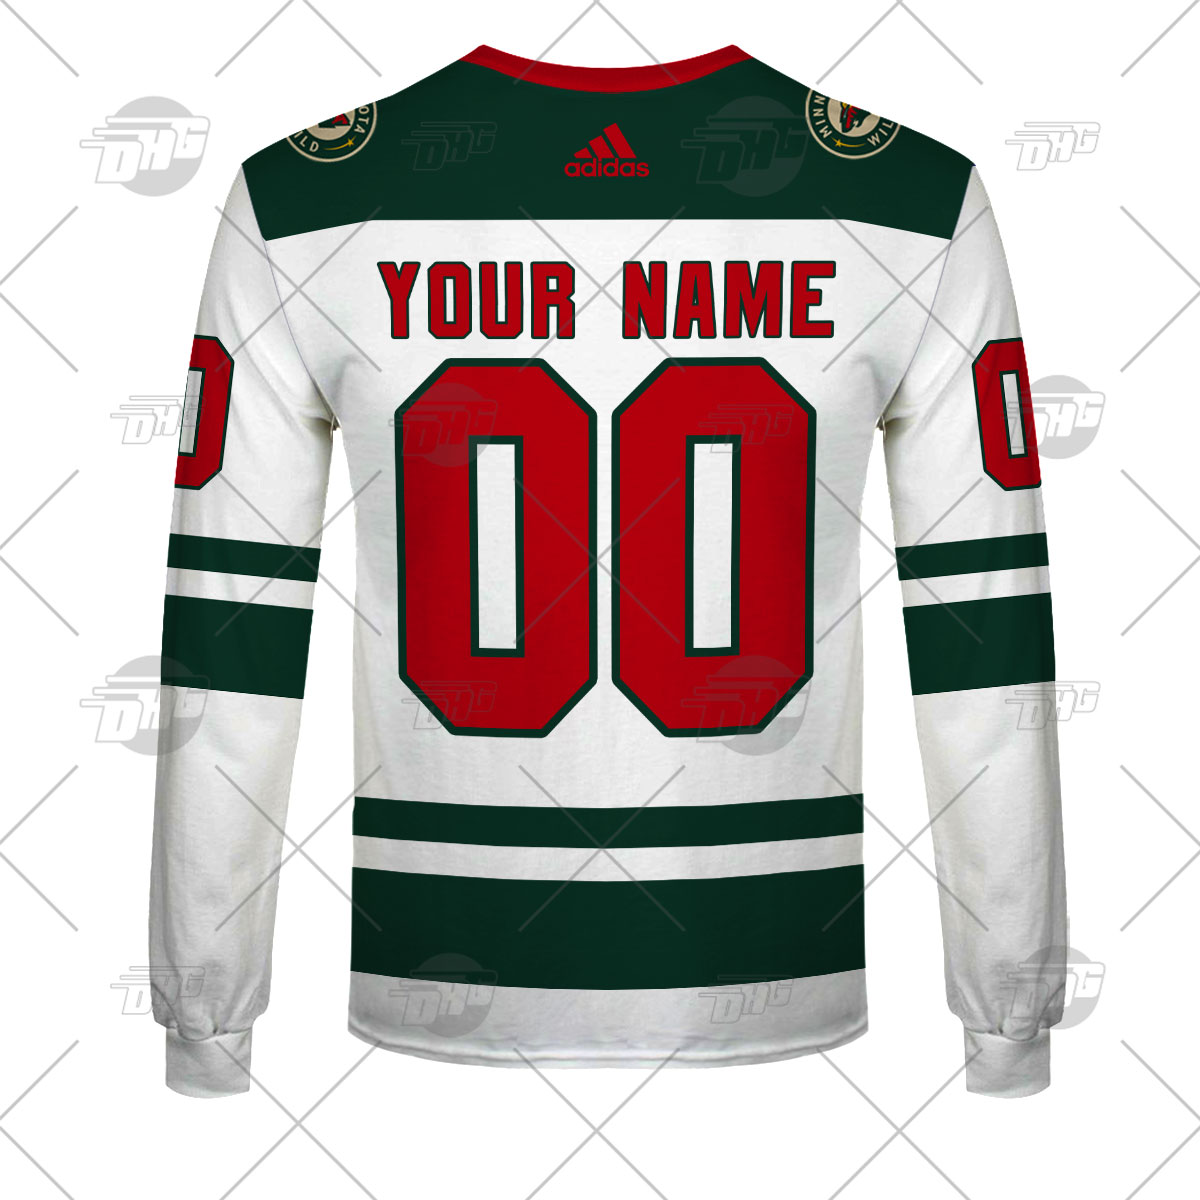 Personalized NHL Men's Anaheim Ducks 2022 Orange Alternate Jersey -  OldSchoolThings - Personalize Your Own New & Retro Sports Jerseys, Hoodies,  T Shirts